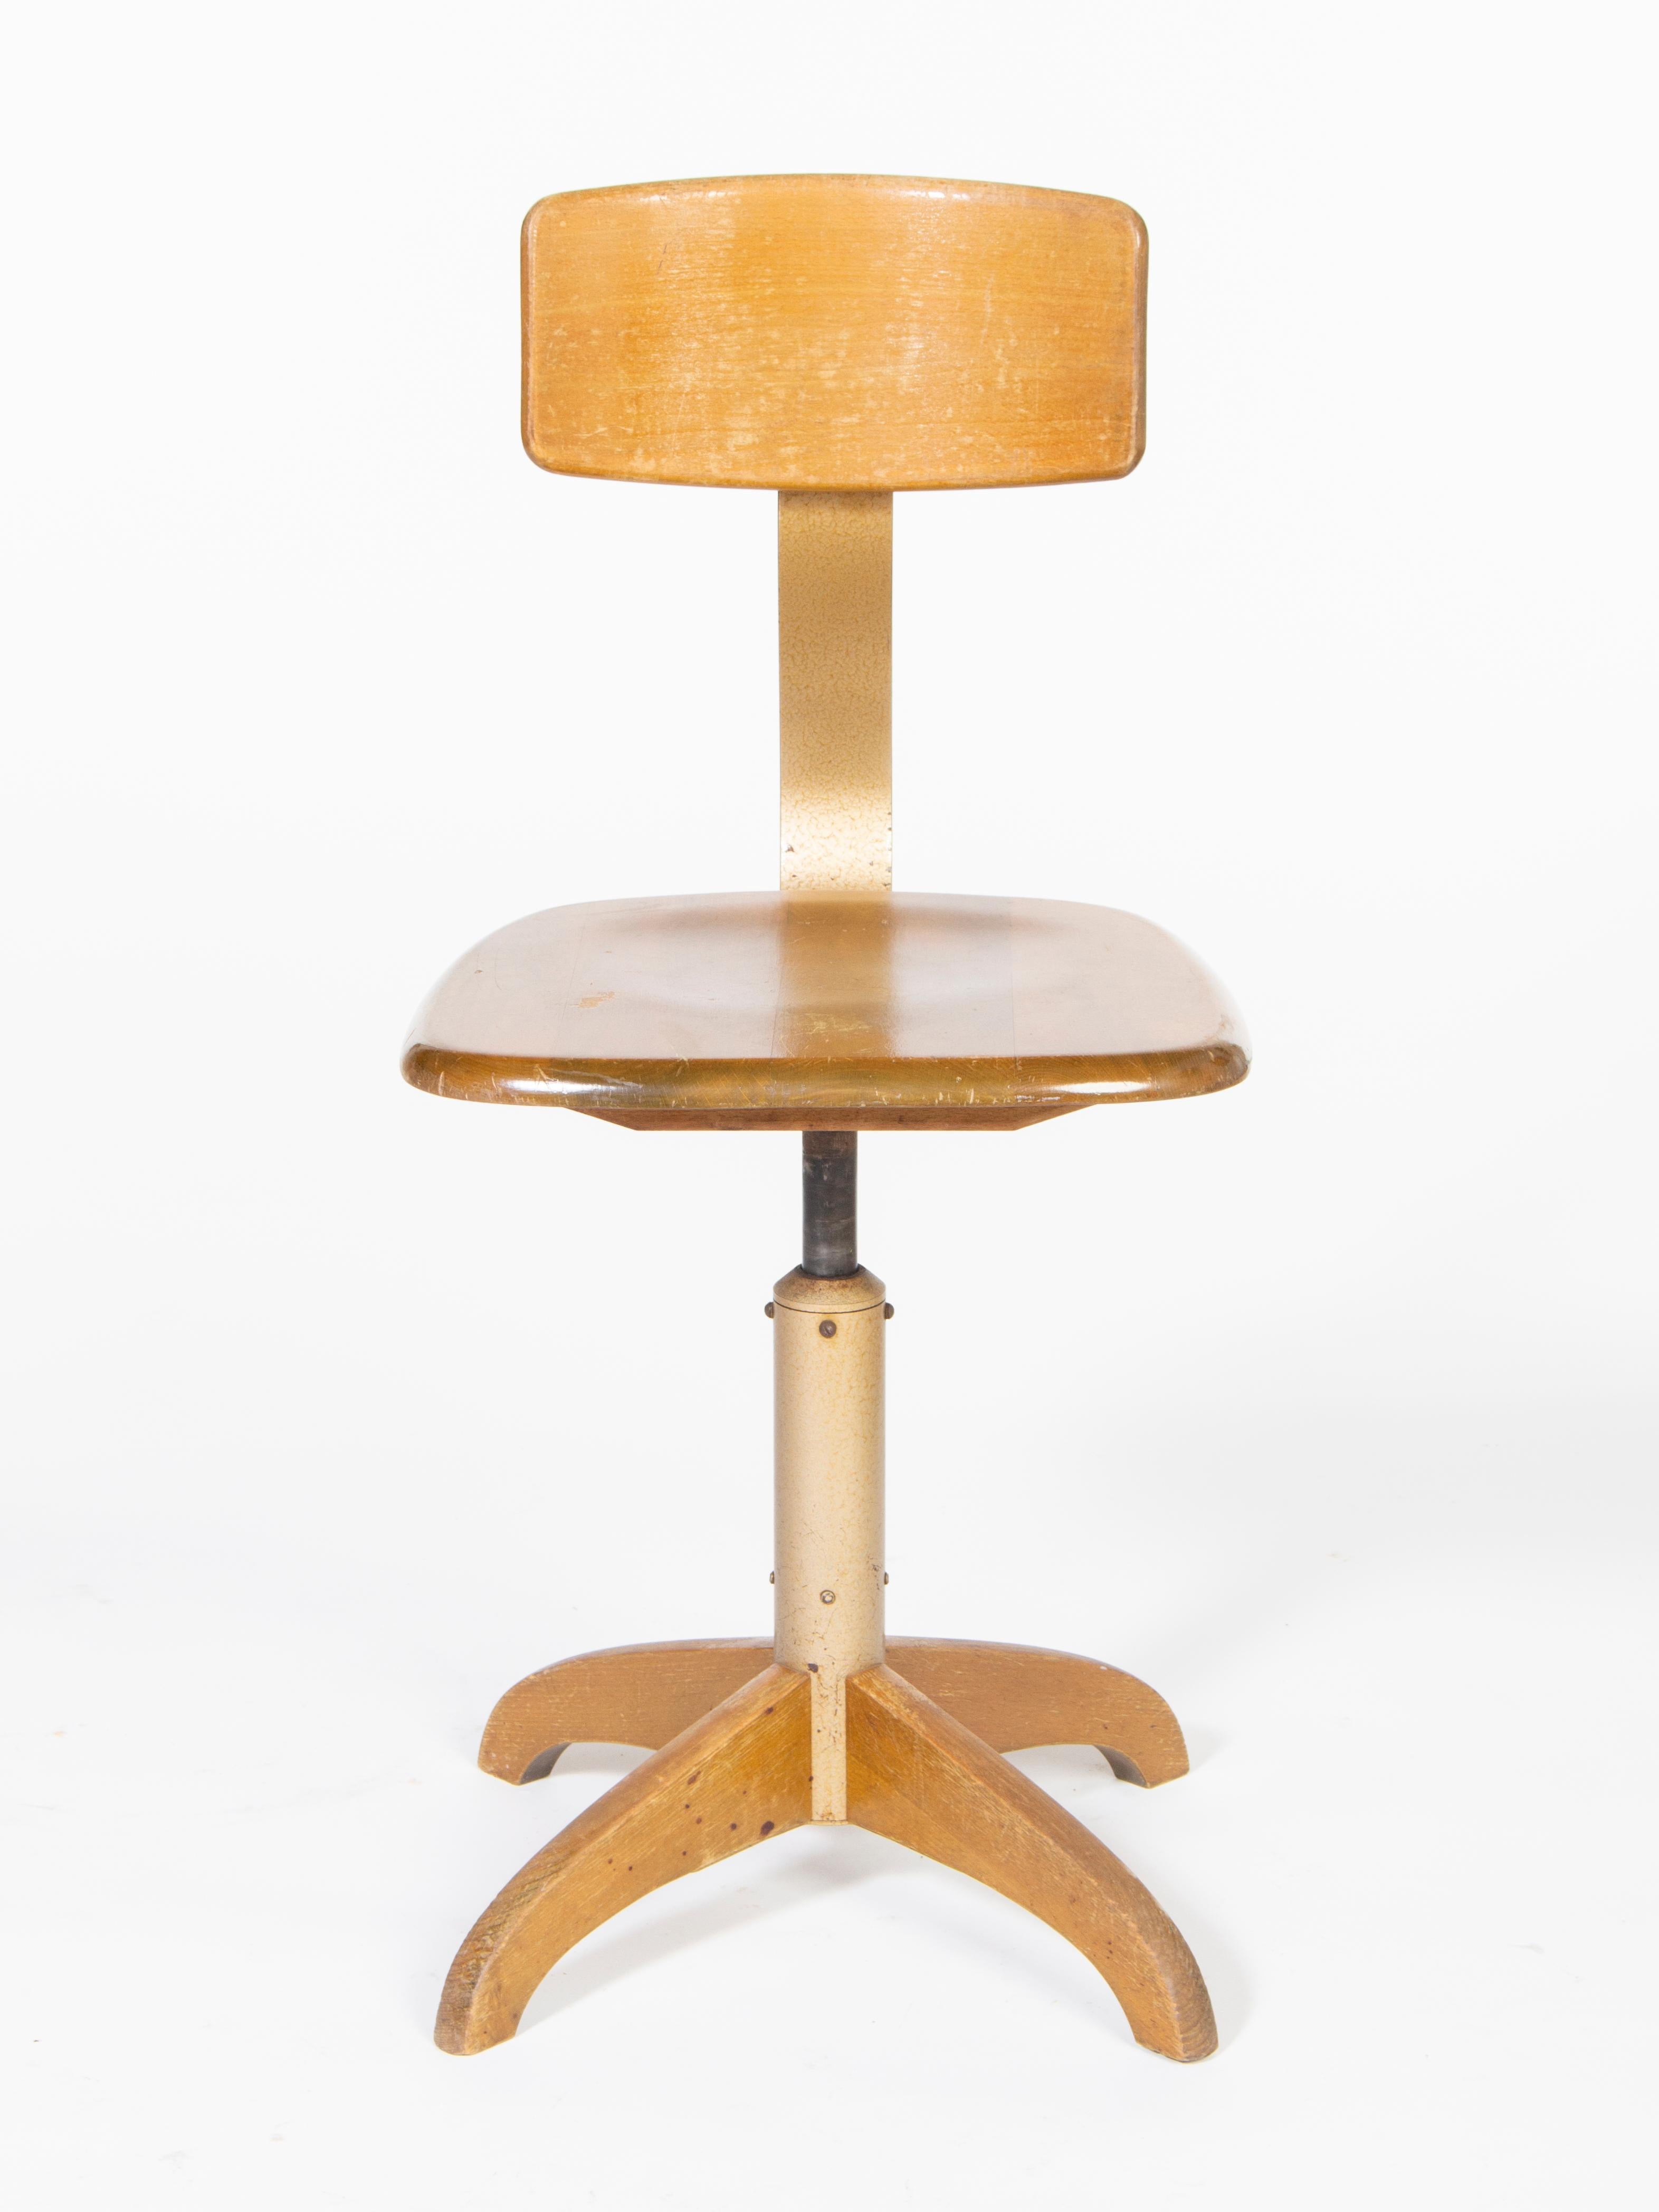 Bauhaus wooden swivel workshop chair.
Manufactured by Ama Elastik, Model number 364.
Adjustable seat height with hydraulic suspension, as well as adjustable leaning height and leaning distance.
 